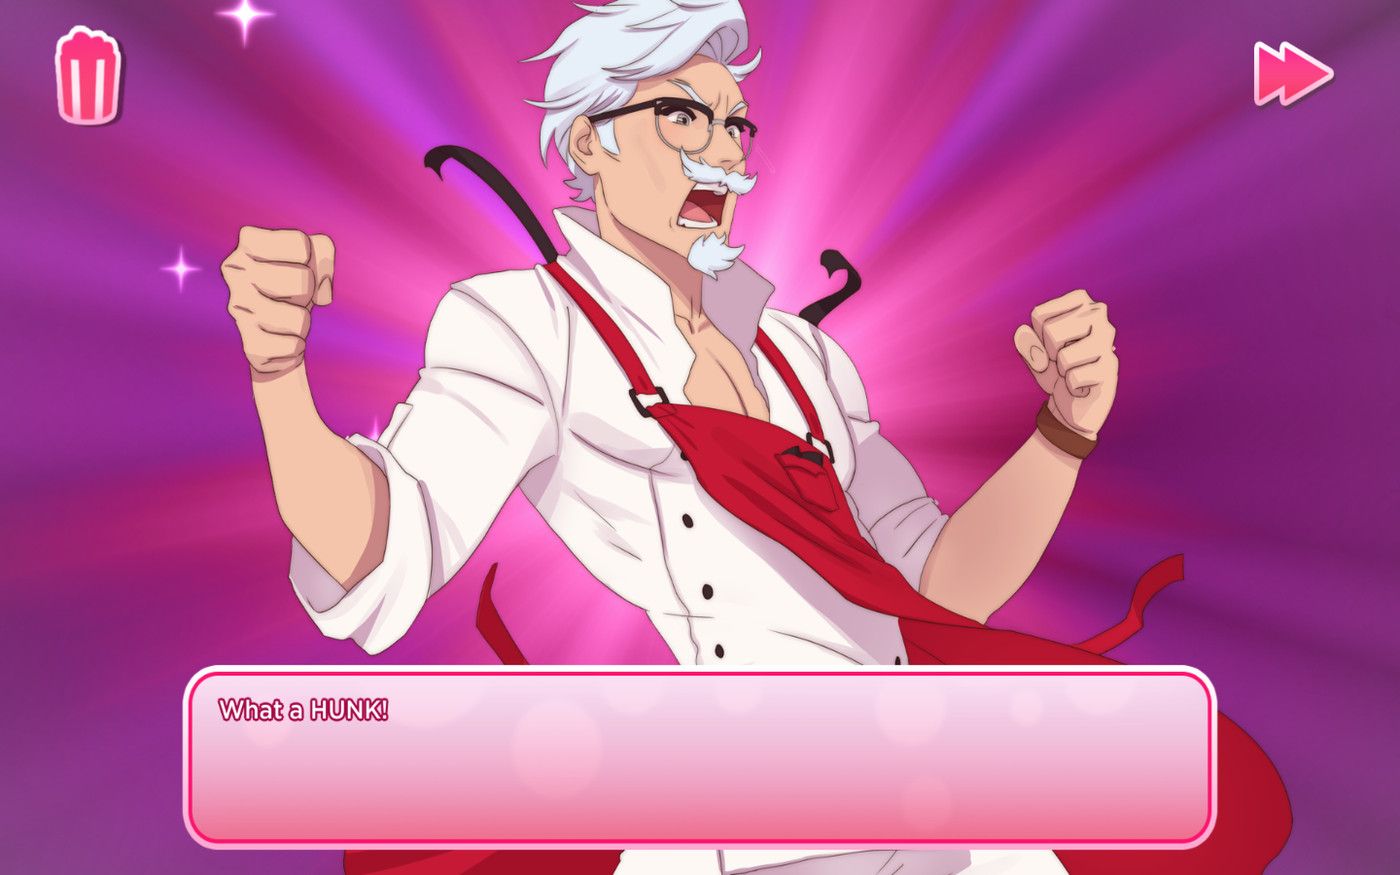 KFC's New Dating Simulator Game Stars a Hot and Single Colonel Sanders